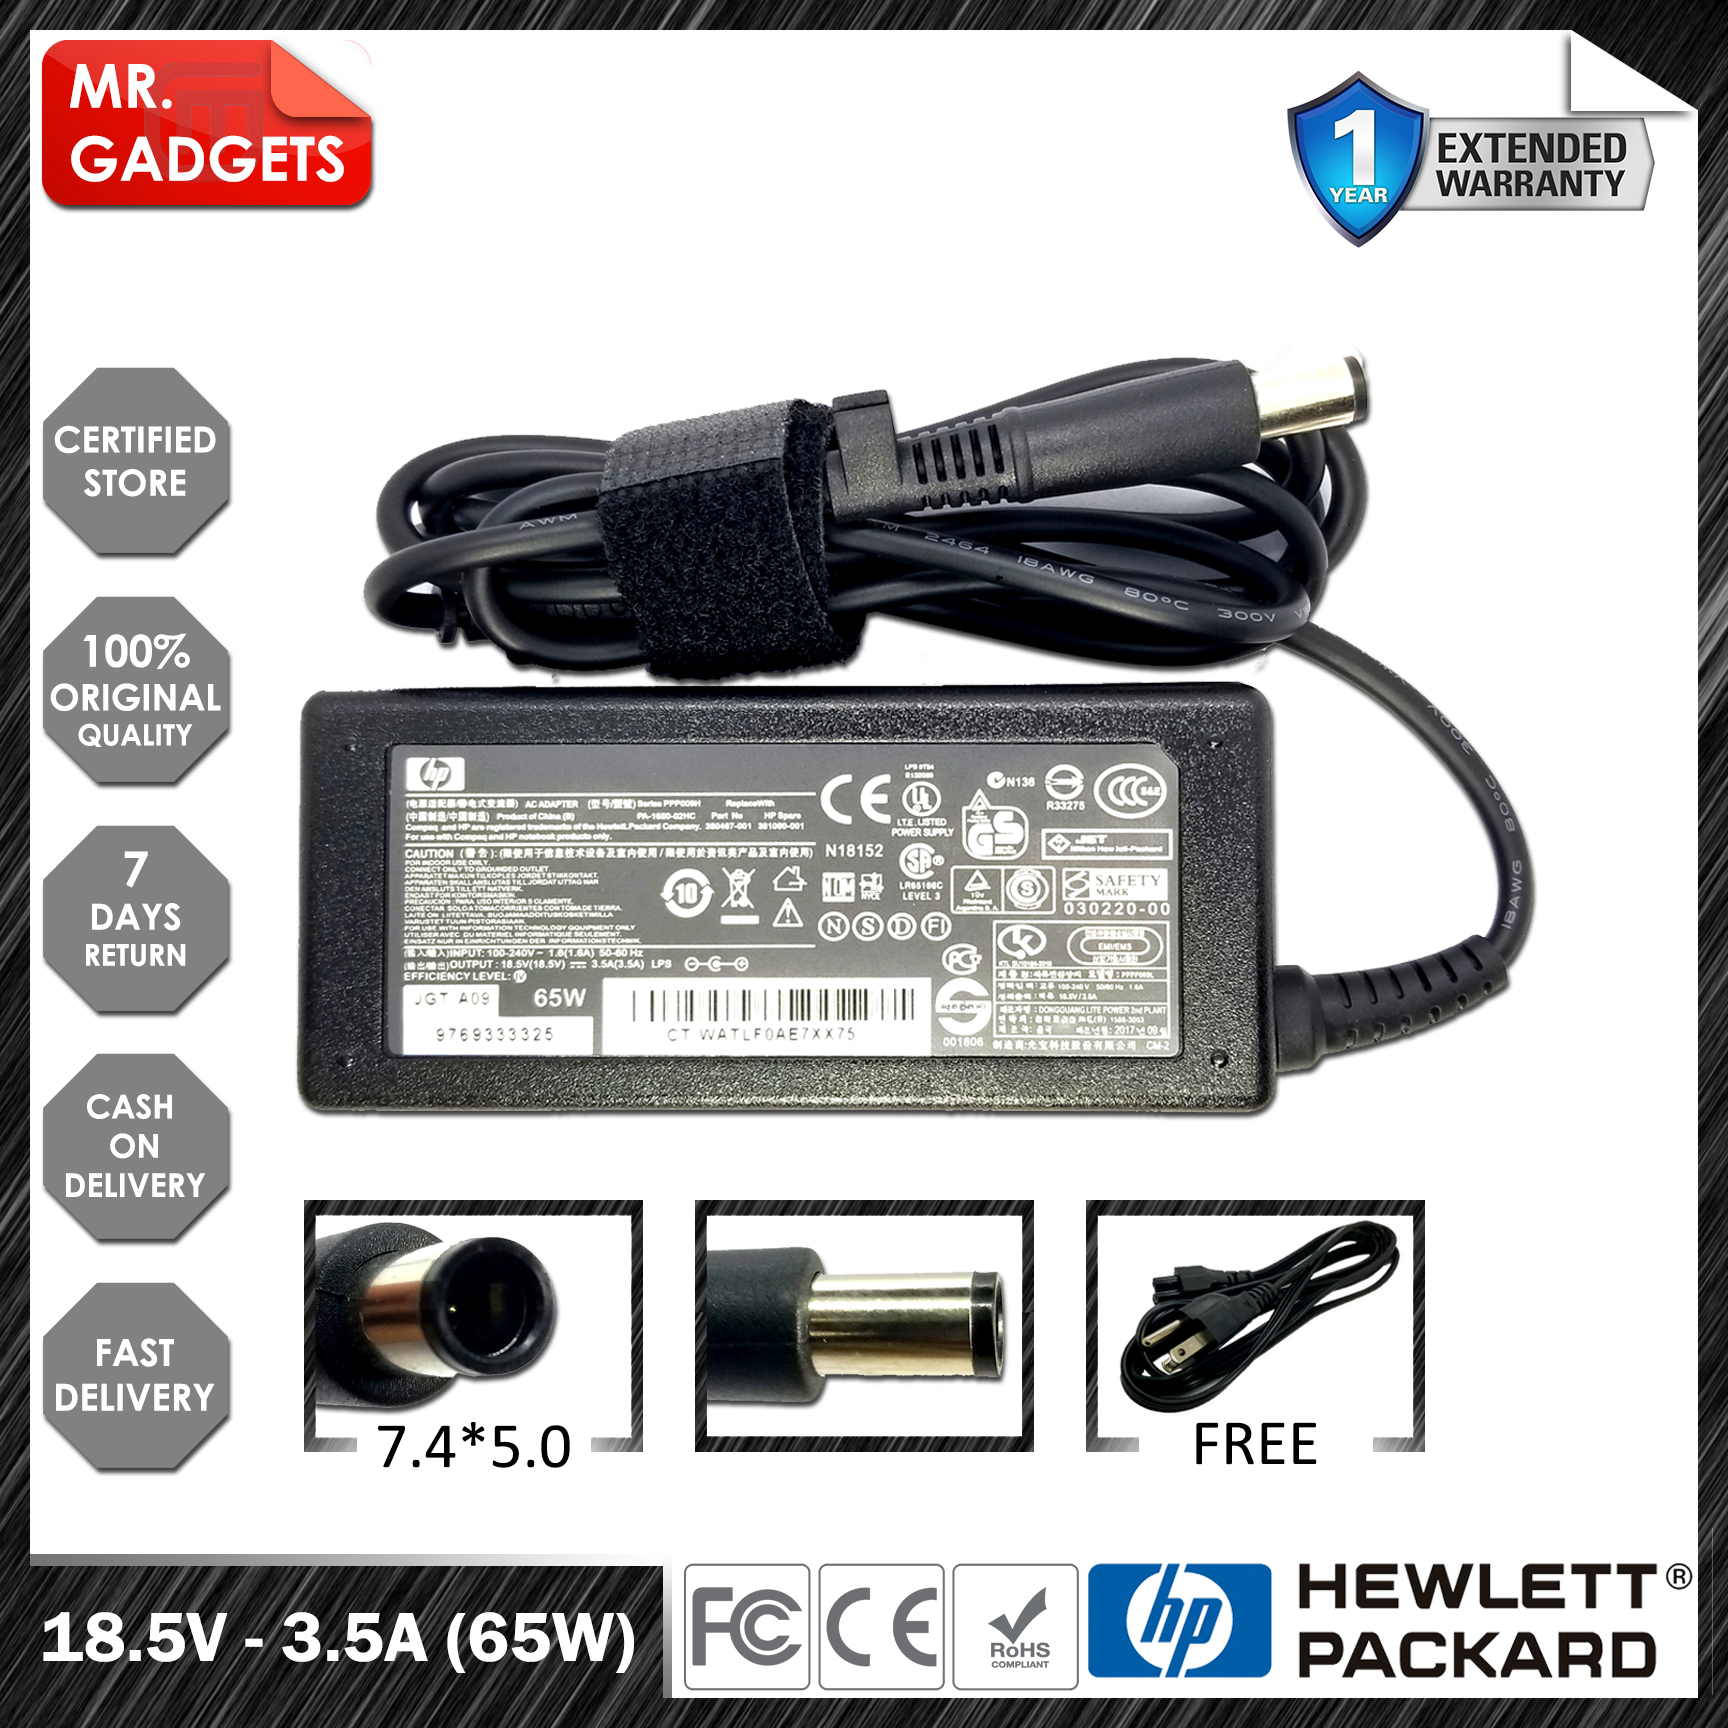 Laptop Charger Adapter for HP 2000 255 2000-2a10nr 2000-2a20nr 2000-2b09wm  2000-2b10nr 2000-2b16nr 2000-2b19wm 2000-2b20nr 2000-2b22dx 2000-2b30dx 2000-2b43dx  2000-2B44DX 2000-2b80dx   ( * ) 65W | Lazada PH